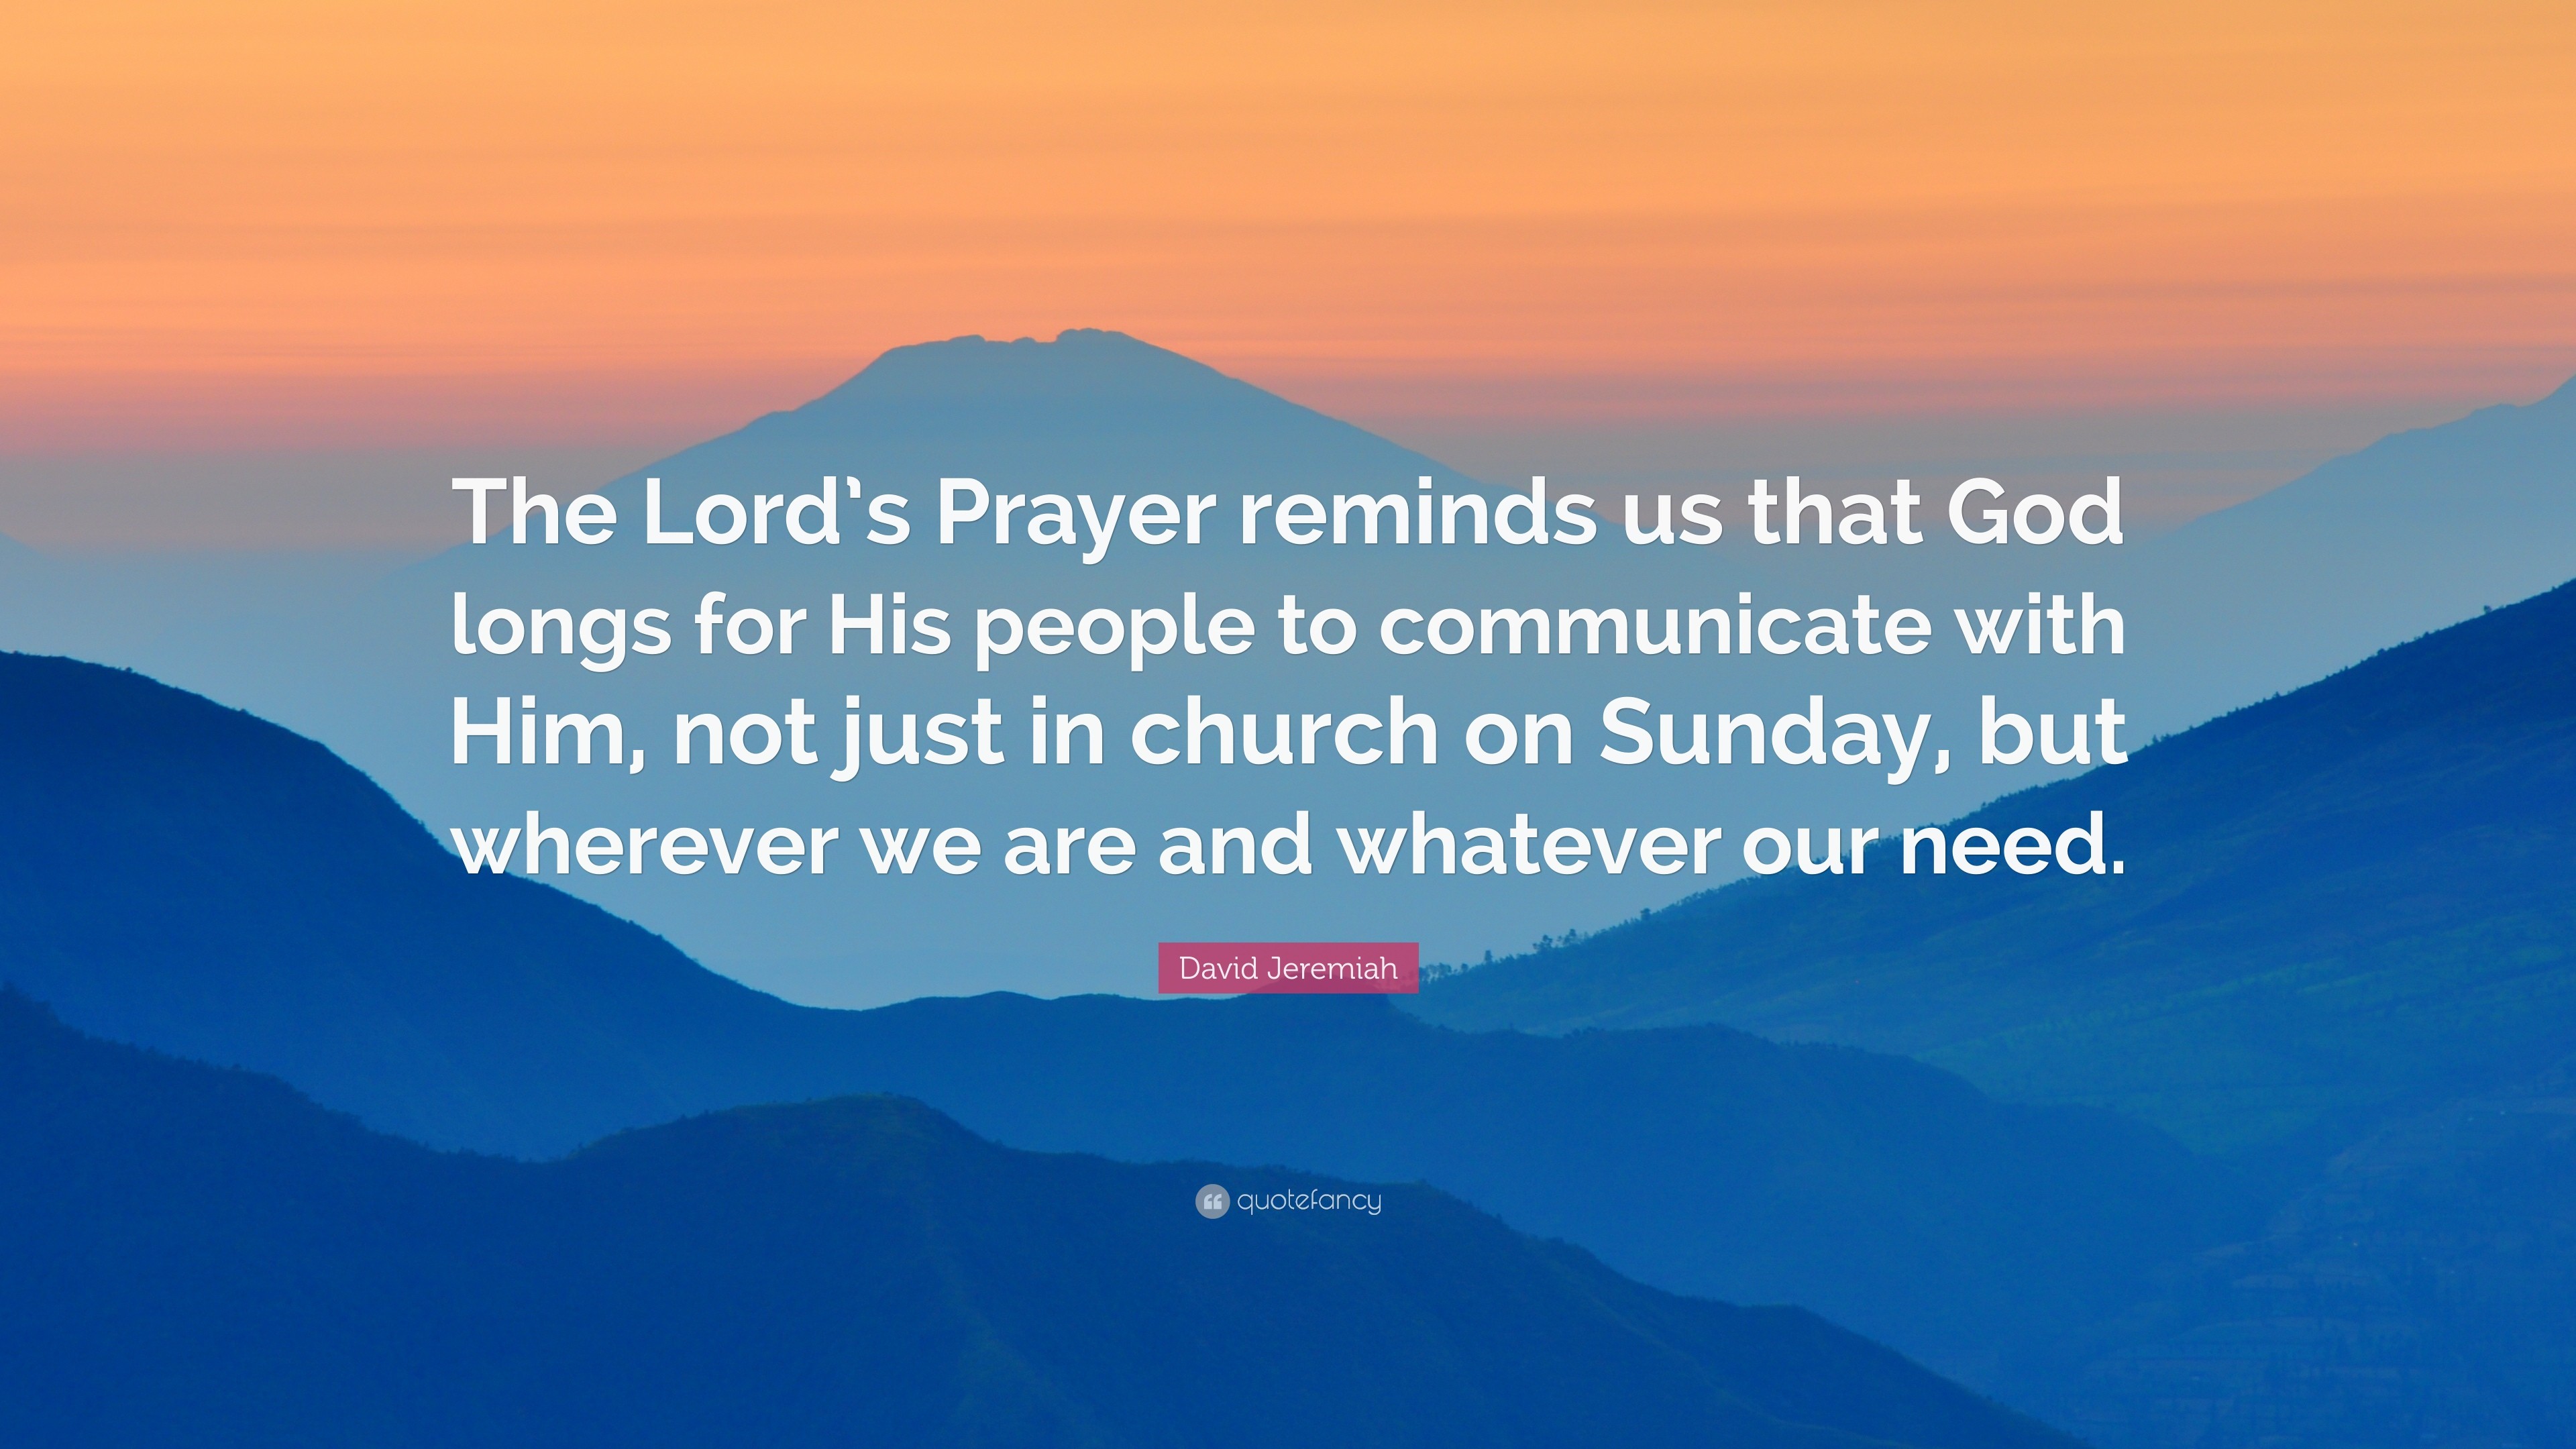 3840x2160 David Jeremiah Quote: “The Lord's Prayer reminds us that God longs for His  people